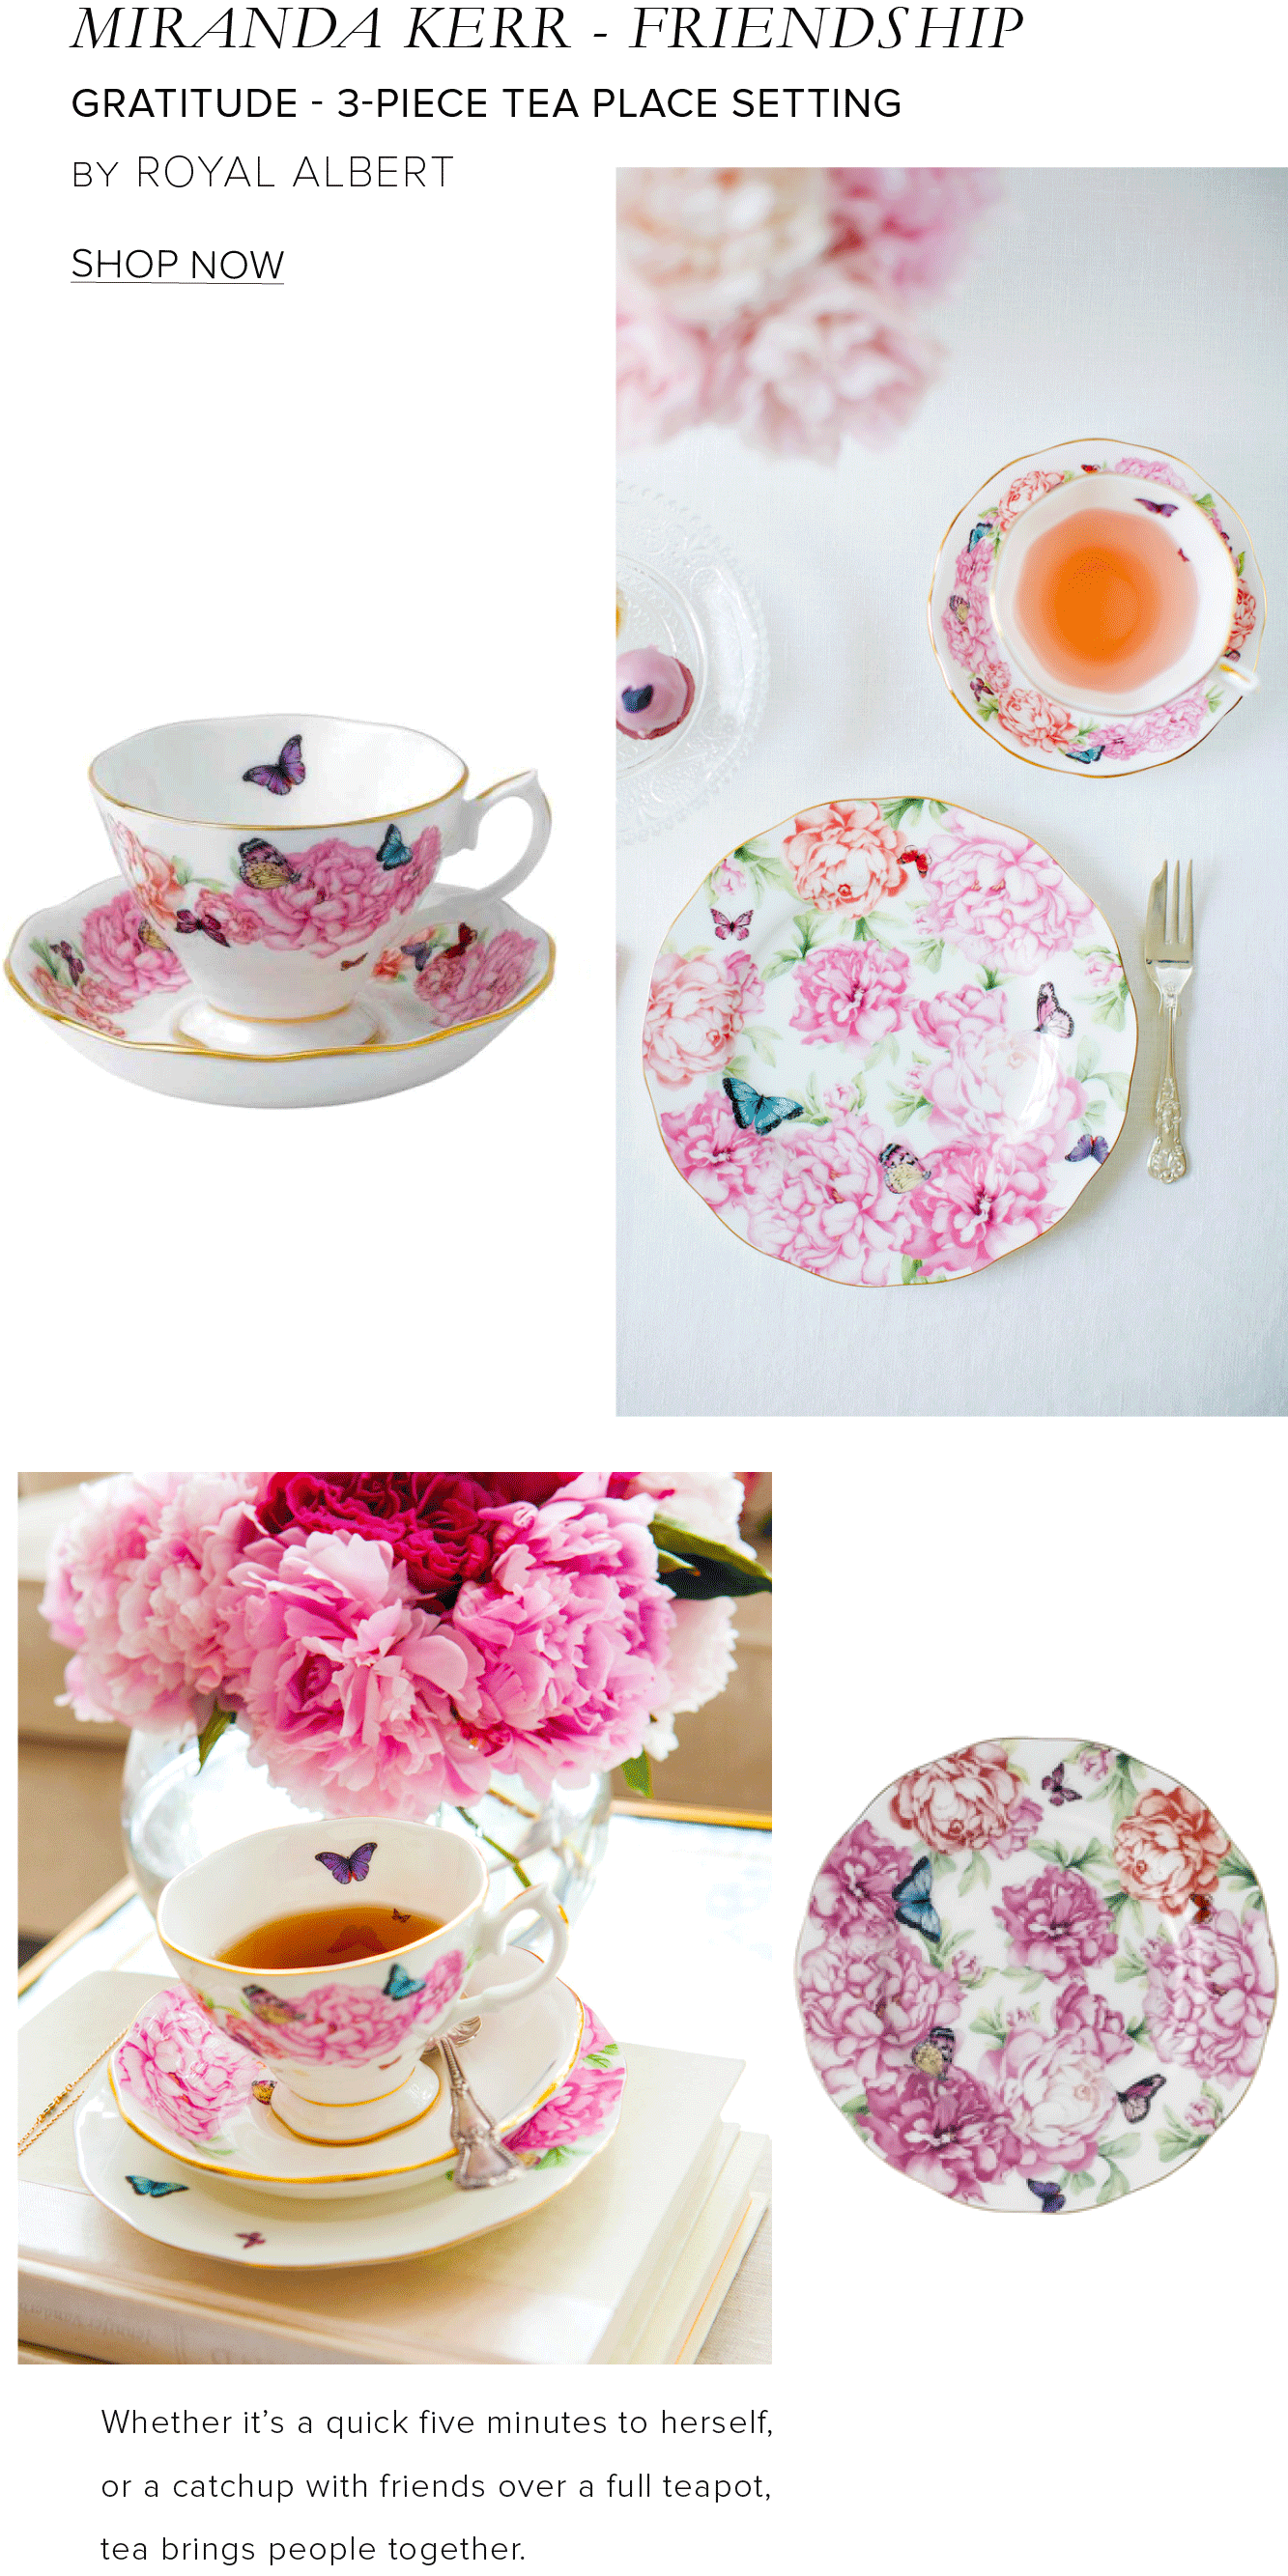 MIRANDA KERR - FRIENDSHIP GRATITUDE - 3-PIECE TEA PLACE SETTING BY ROYAL ALBERT SHOP NOW Whether it's a quick five minutes to herself, or a catchup with friends over a full teapot, tea brings people together. 